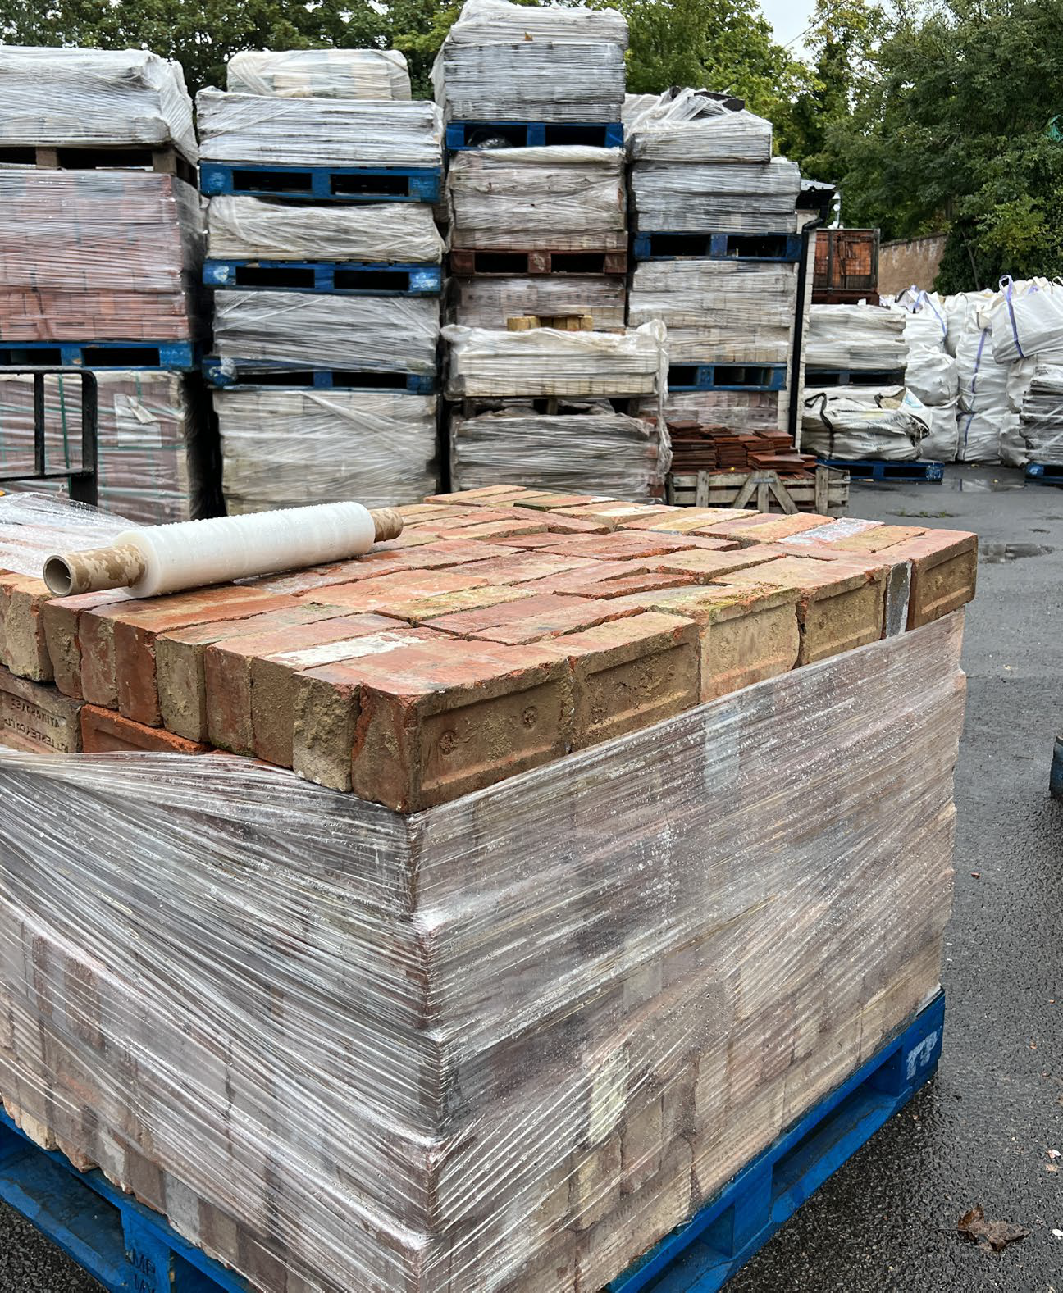 Red London bricks stacked on blue pallet